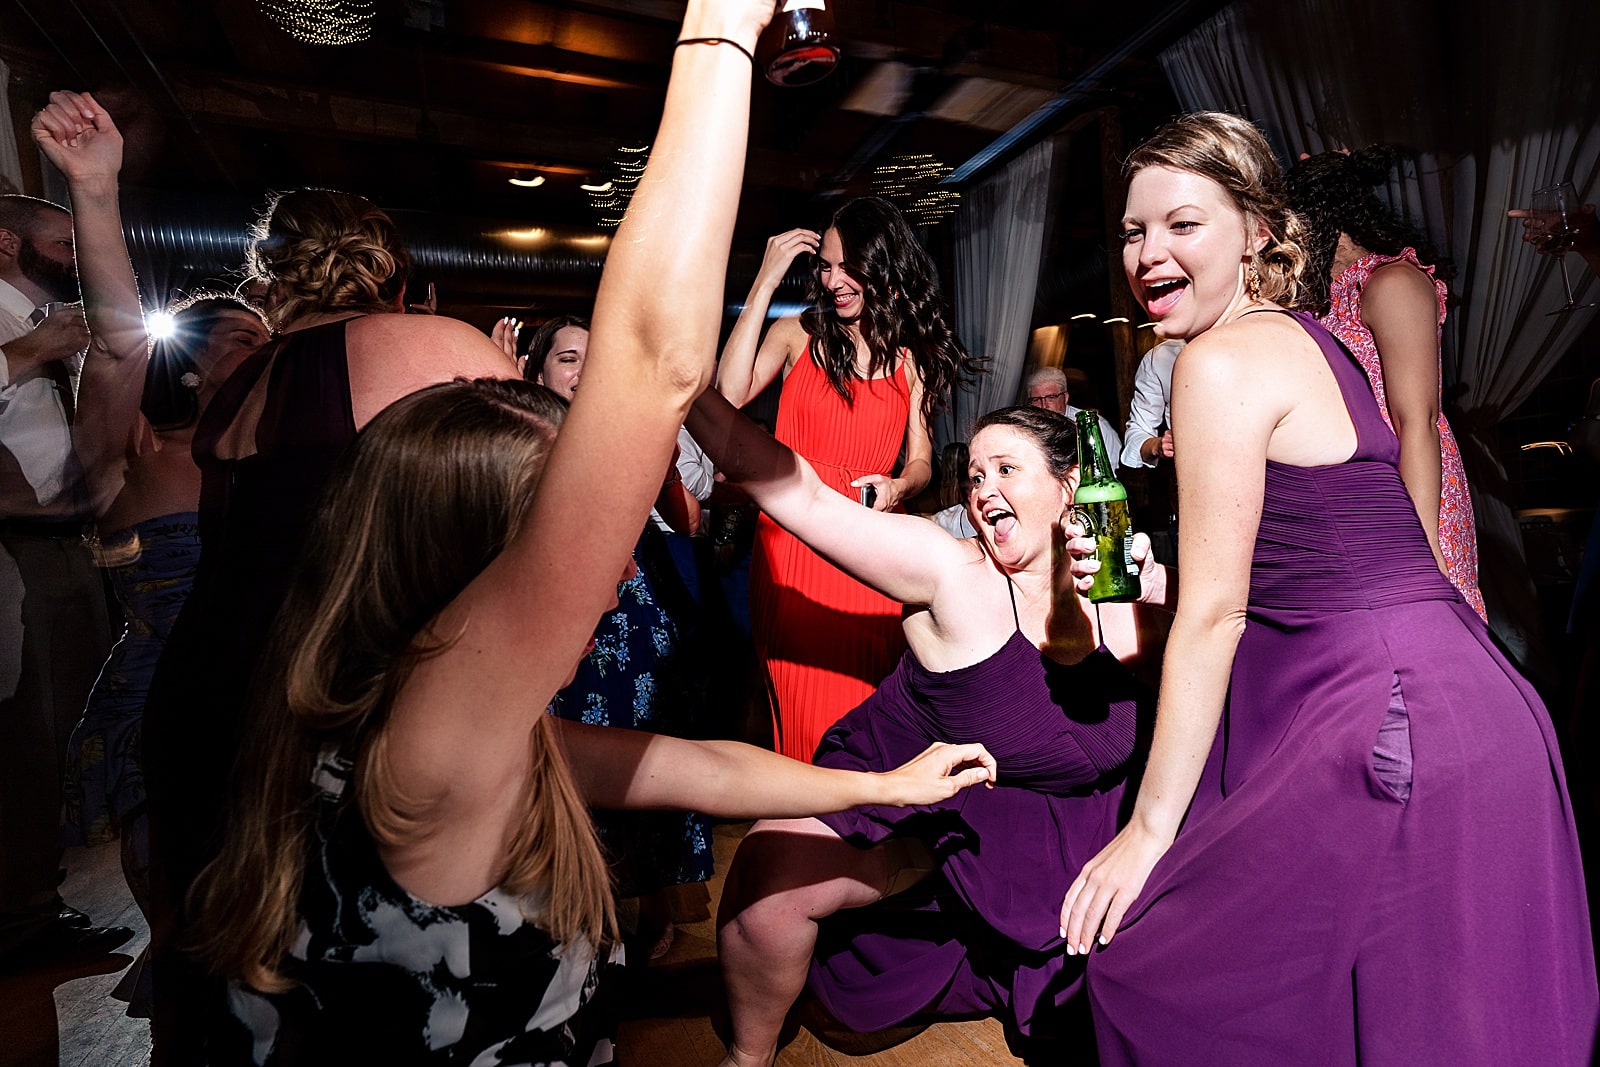 bridesmaids breaking it down on the dancefloor? Sign of a great night